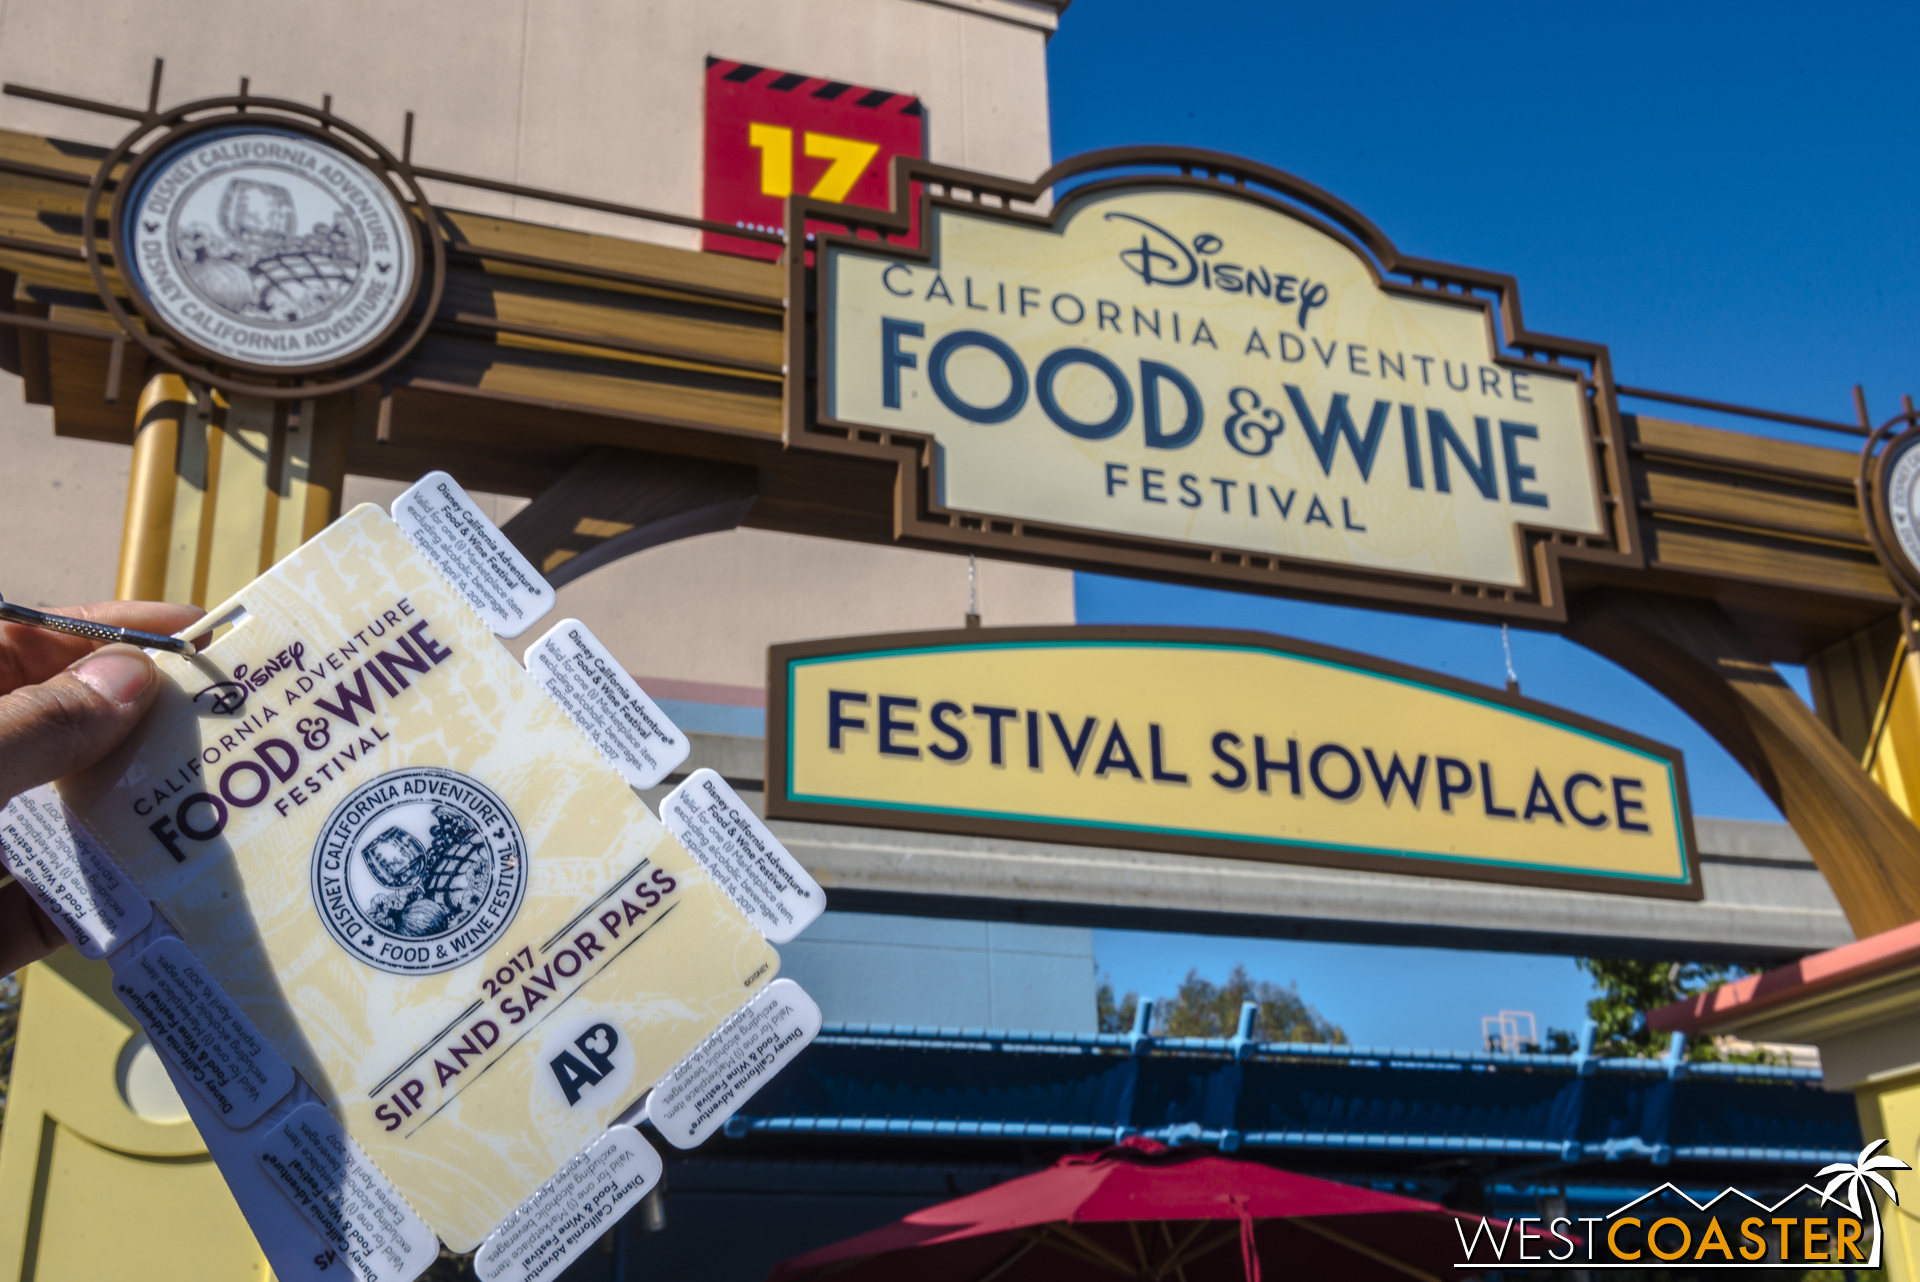  Back this year is the Annual Passholder tasting pass, called the "Sip and Savor Pass" this year, which effectively provides a discounted way of purchasing food and non-alcoholic beverage items at the Festival Marketplace.&nbsp; It is $45 for 8 tabs,